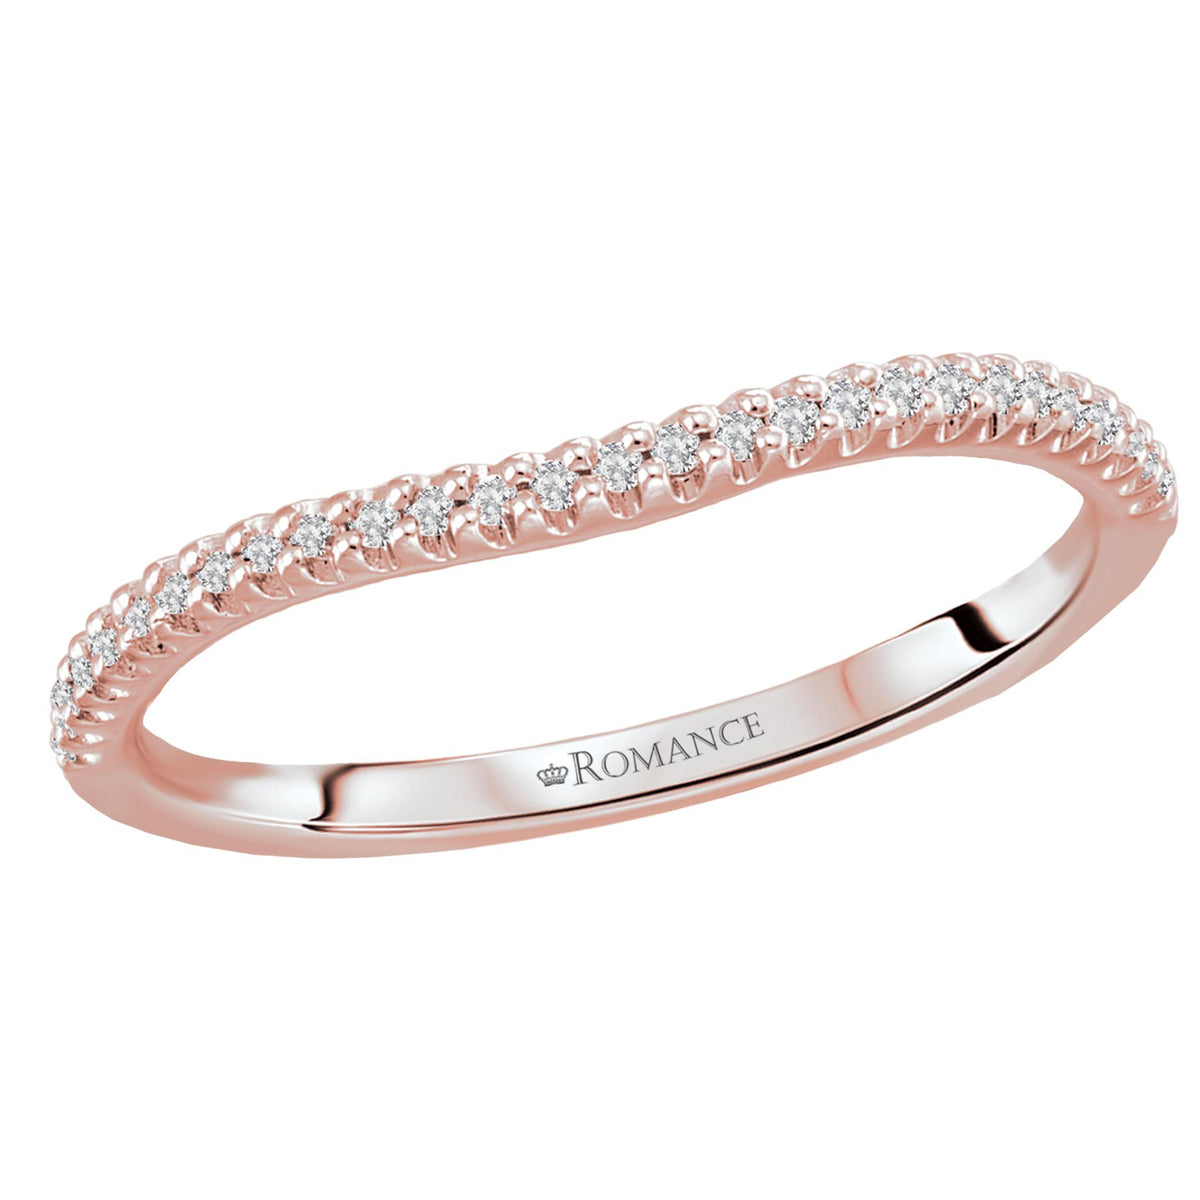 14KT Gold 1/6 CTW Diamond Curved 21 Stone Band Rose / 4,Rose / 4.5,Rose / 5,Rose / 5.5,Rose / 6,Rose / 6.5,Rose / 7,Rose / 7.5,Rose / 8,Rose / 8.5,Rose / 9